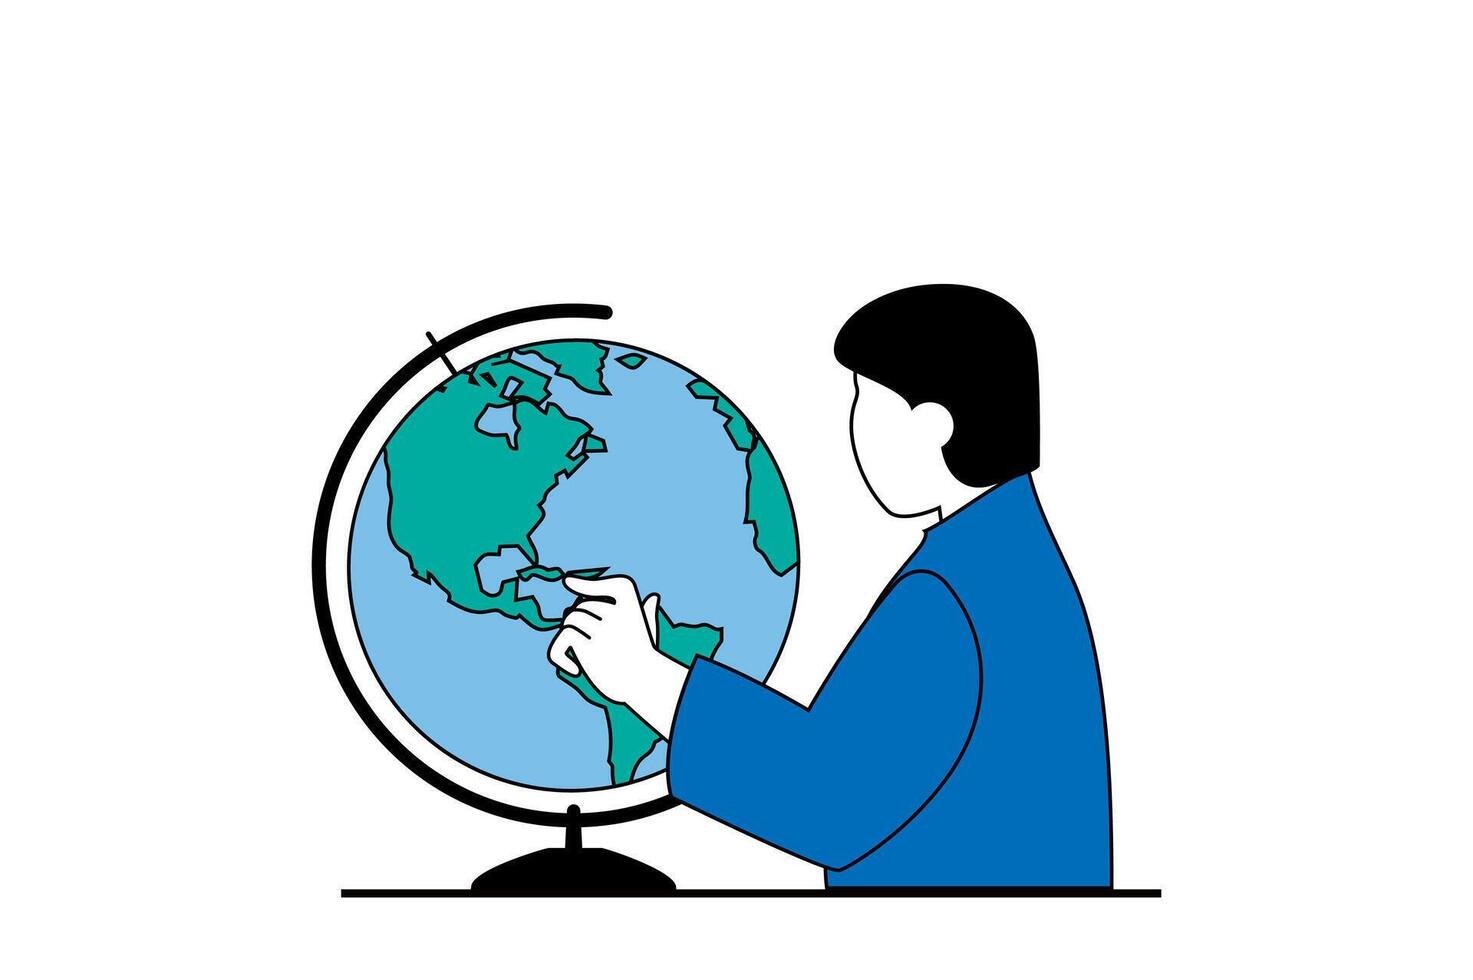 Education concept with people scene in flat web design. Student learning geography and researching world map at globe in classroom. Vector illustration for social media banner, marketing material.